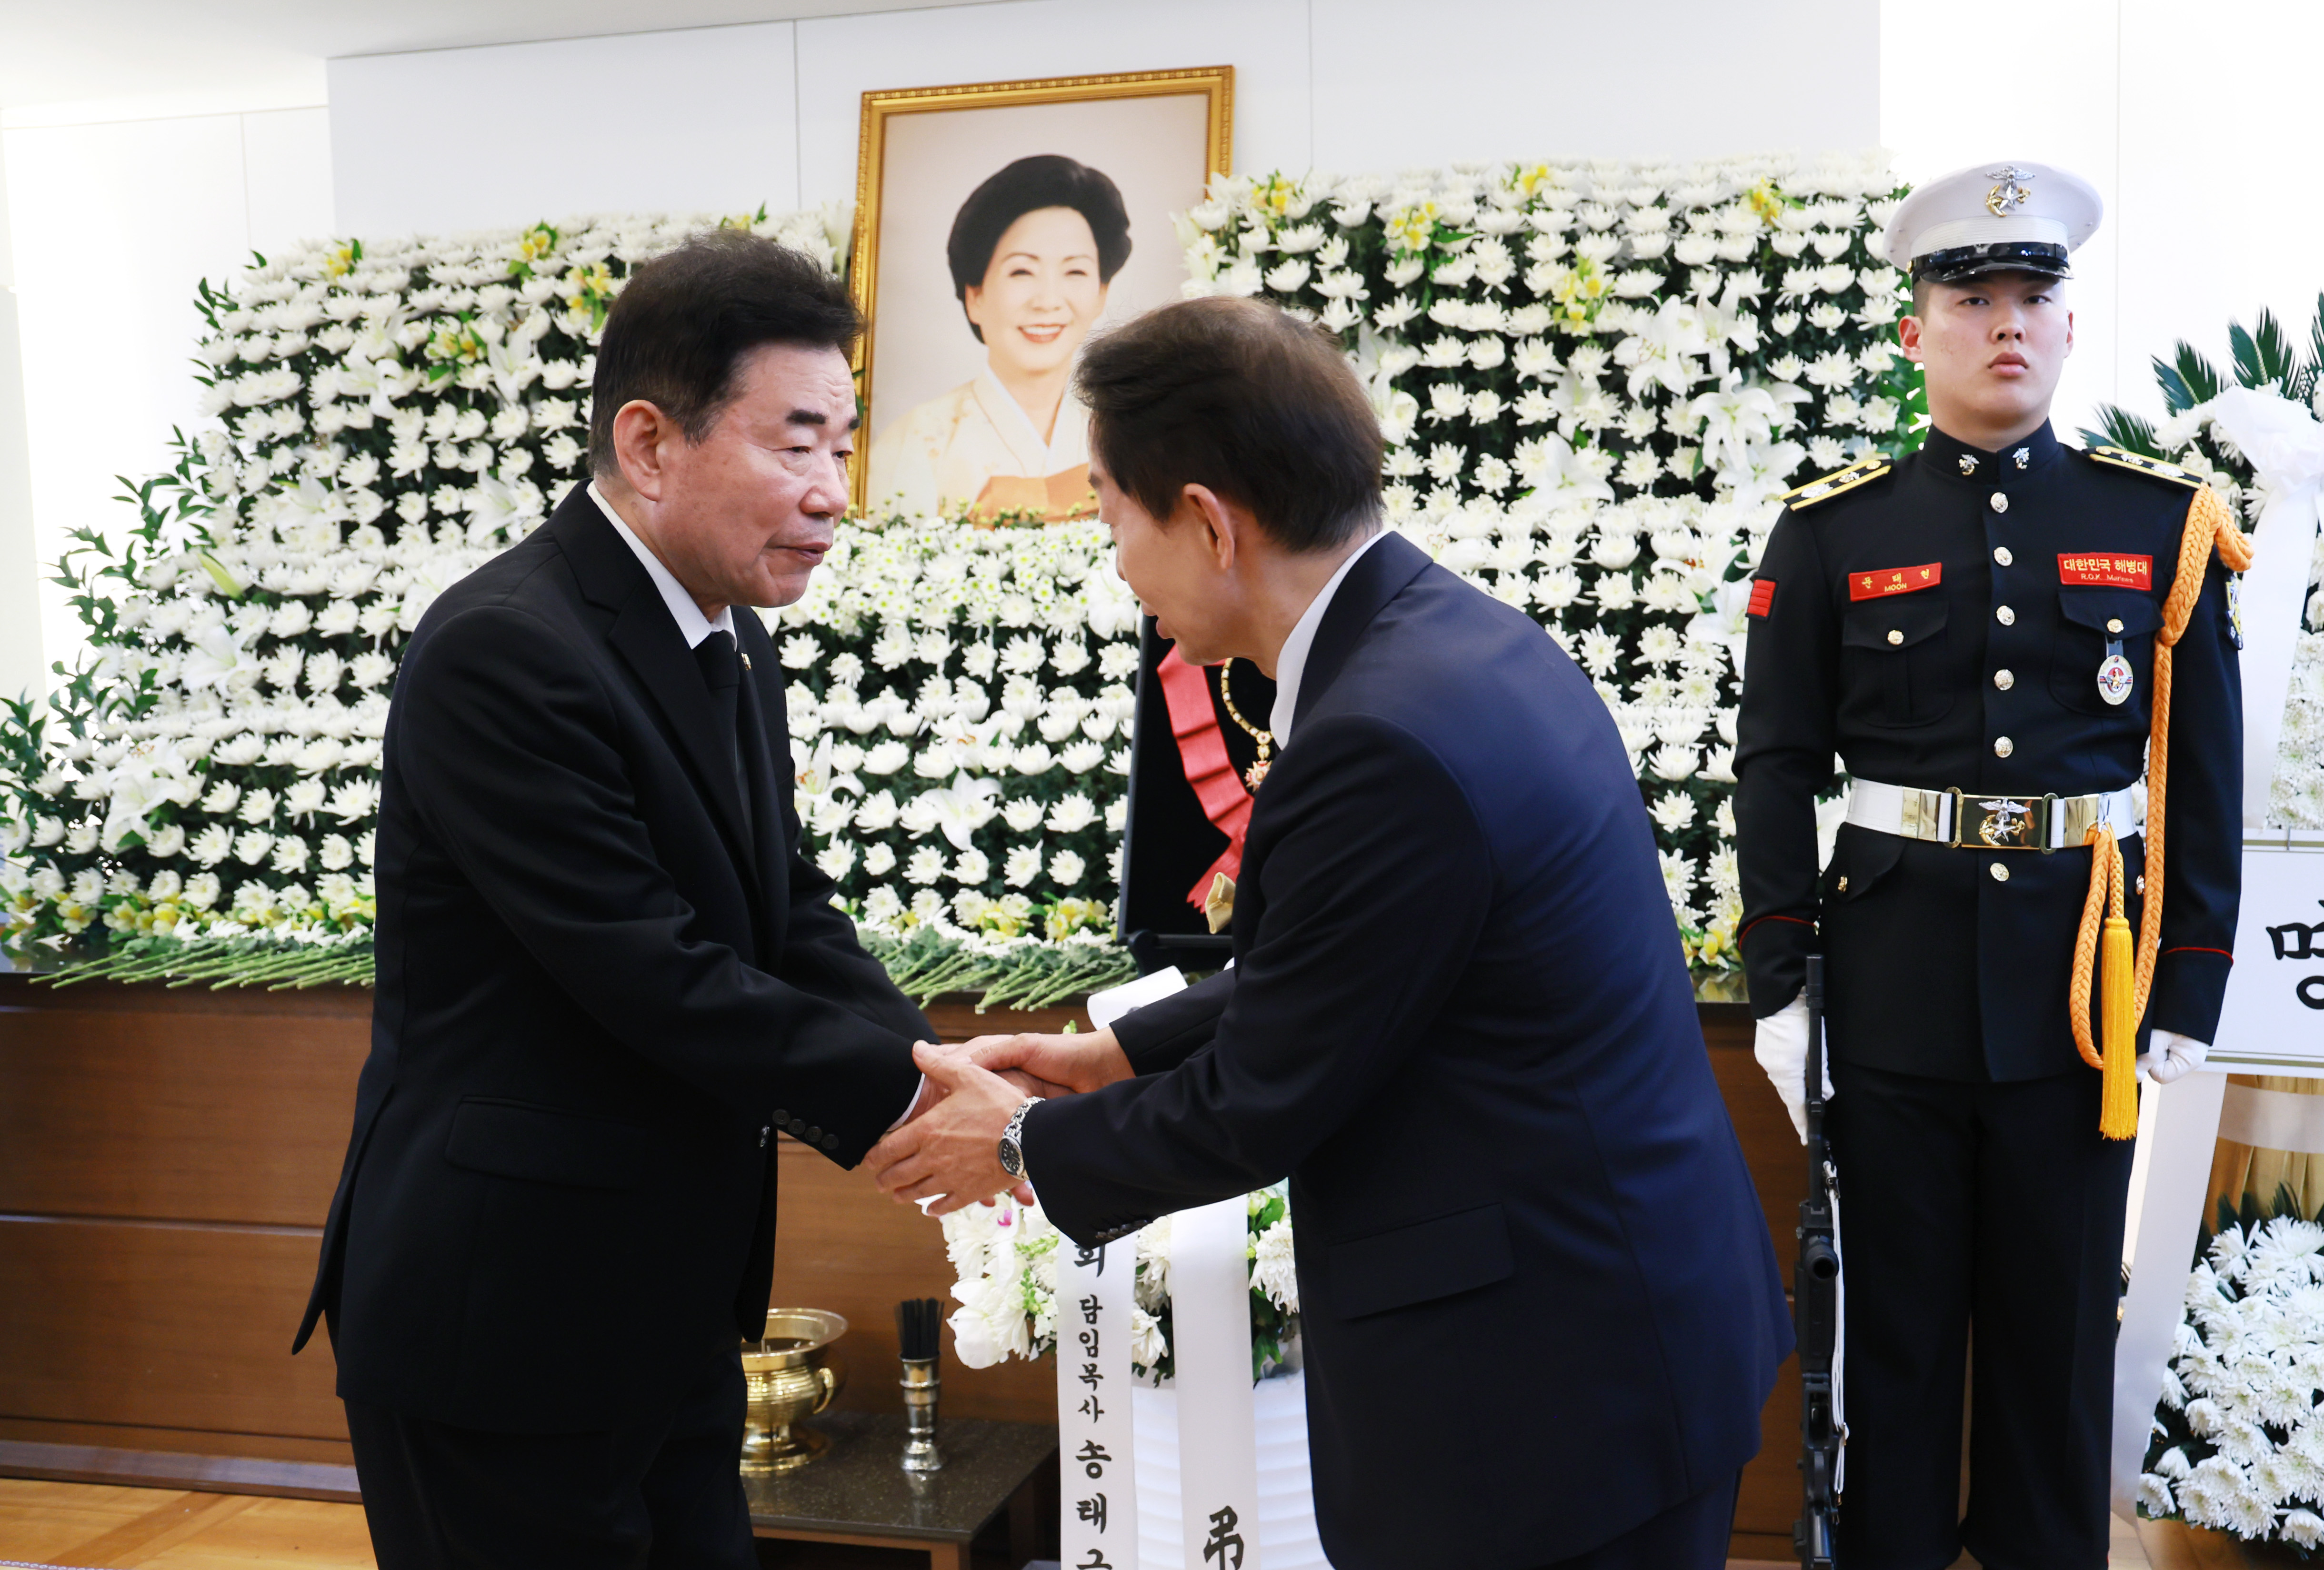  [Photo] Speaker pays final respects to former First Lady Son Myung-soon 관련사진 5 보기